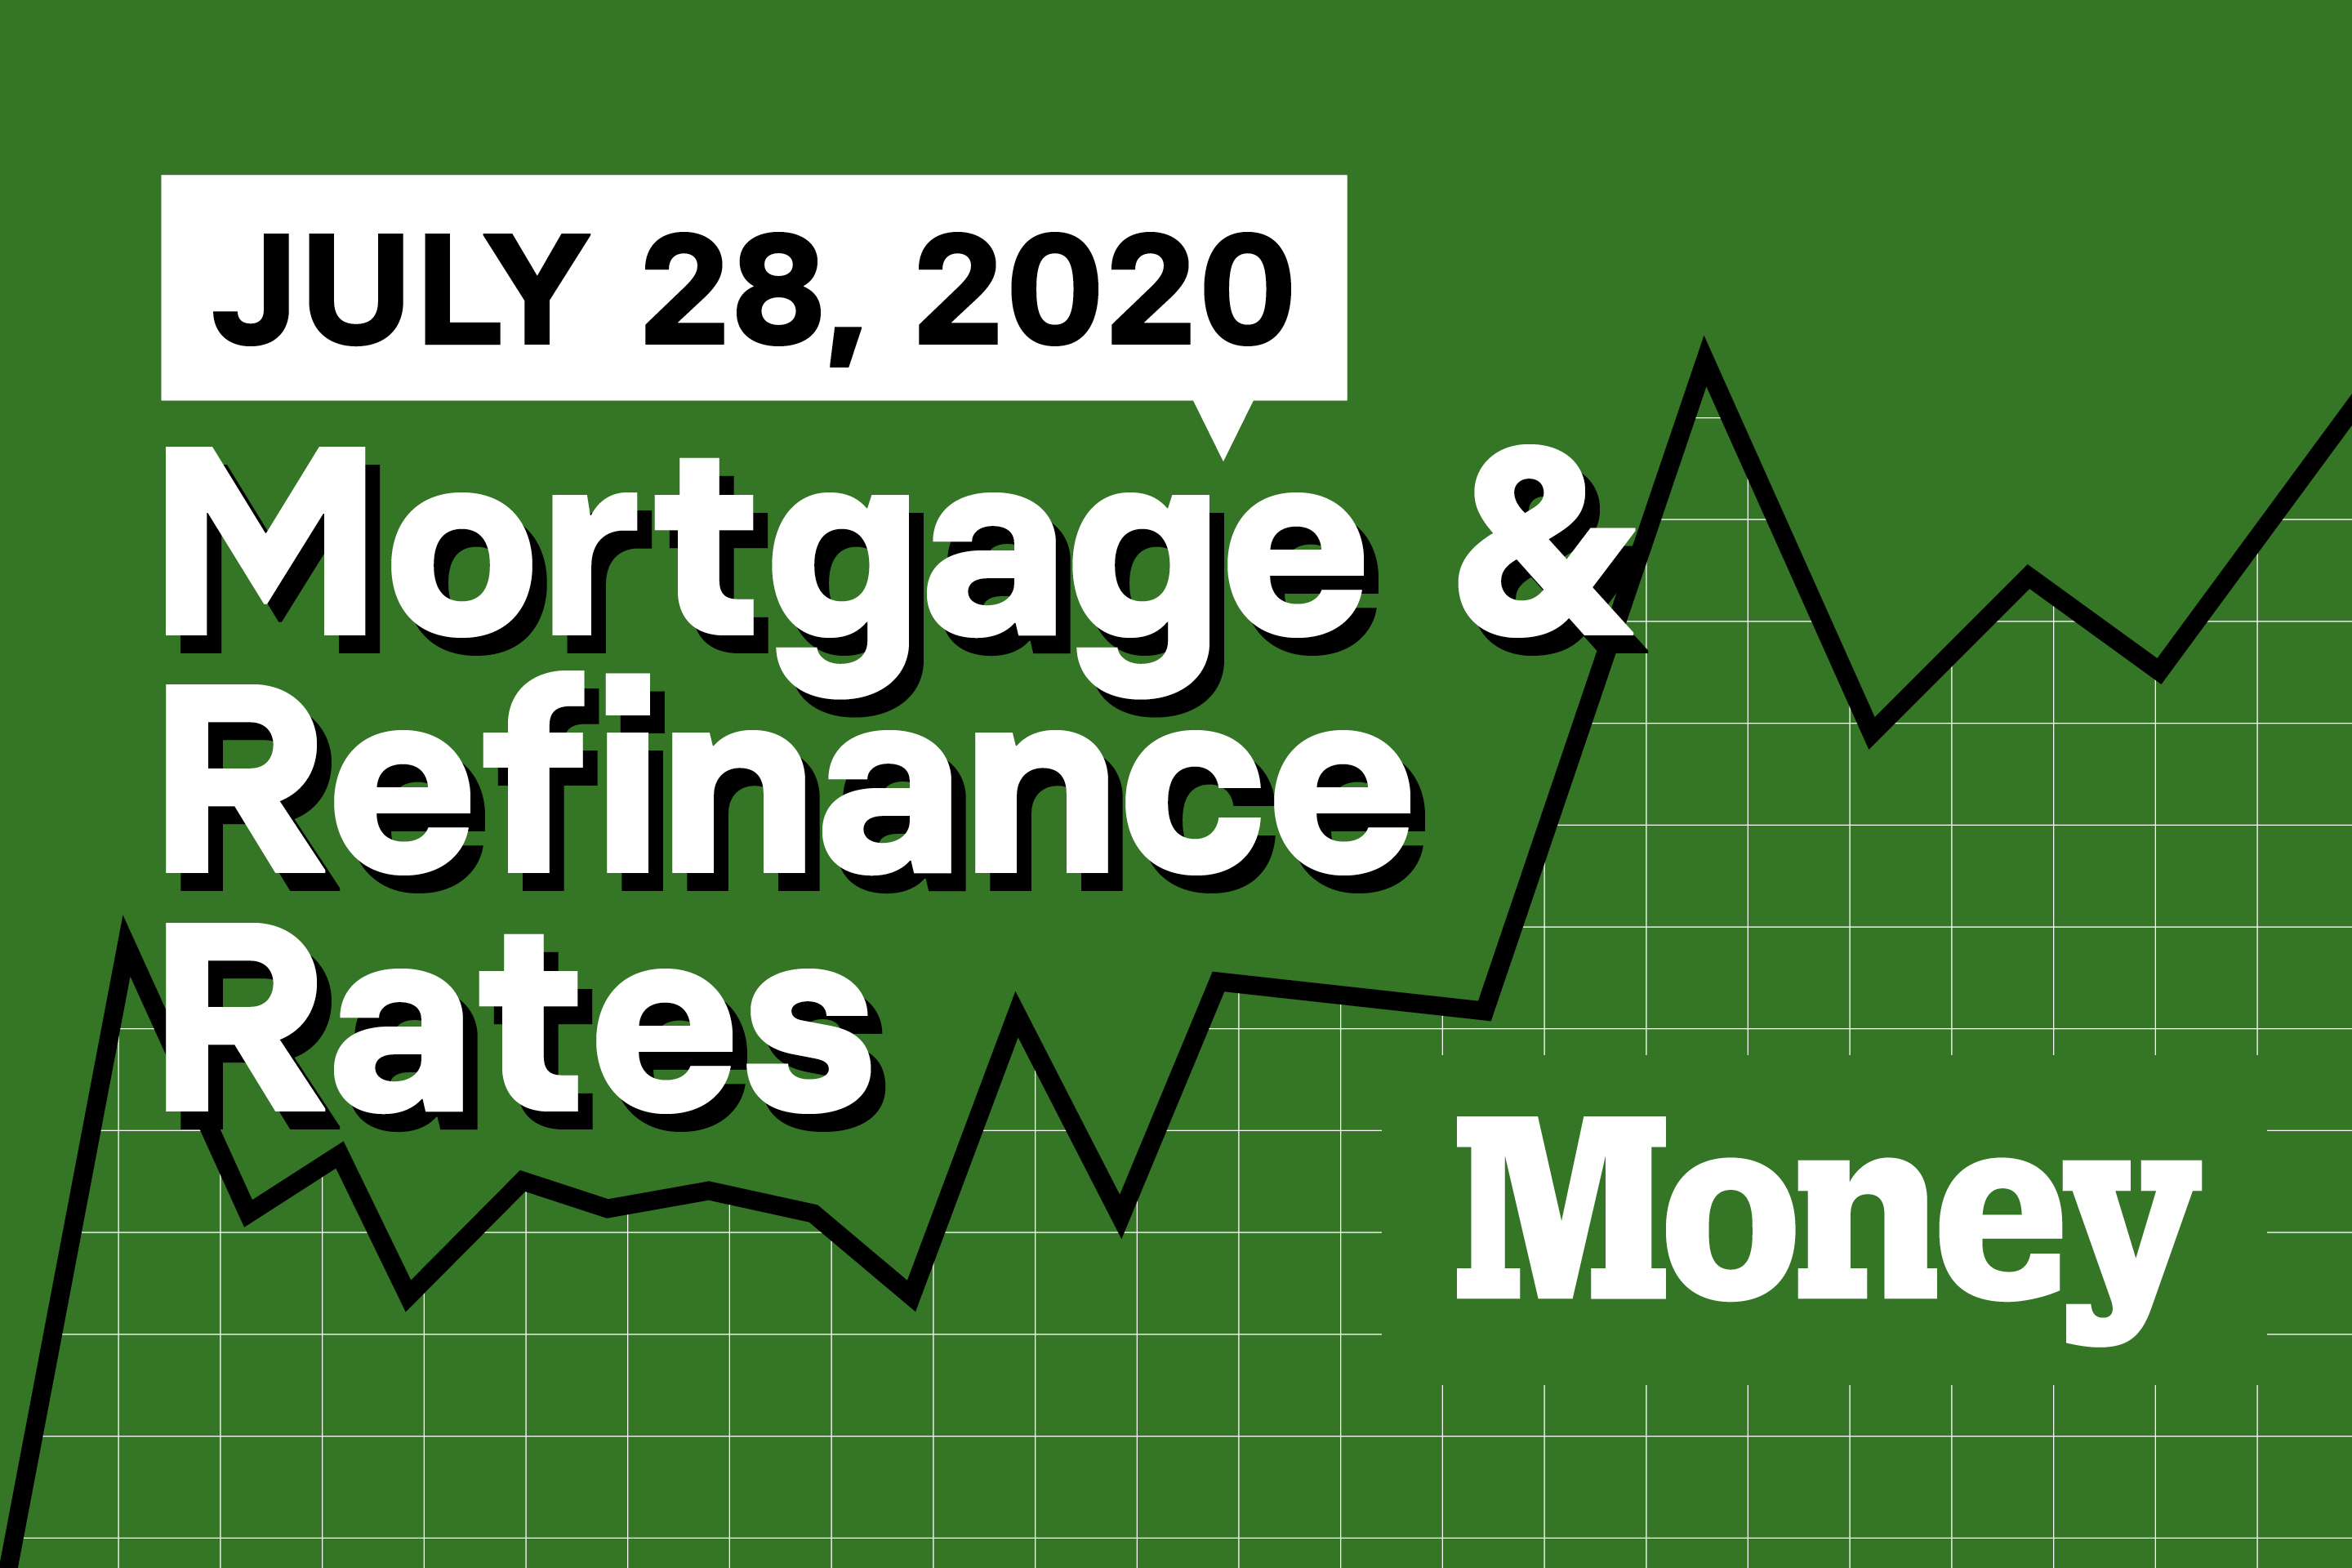 Here Are Today's Best Mortgage & Refinance Rates for July 28, 2020